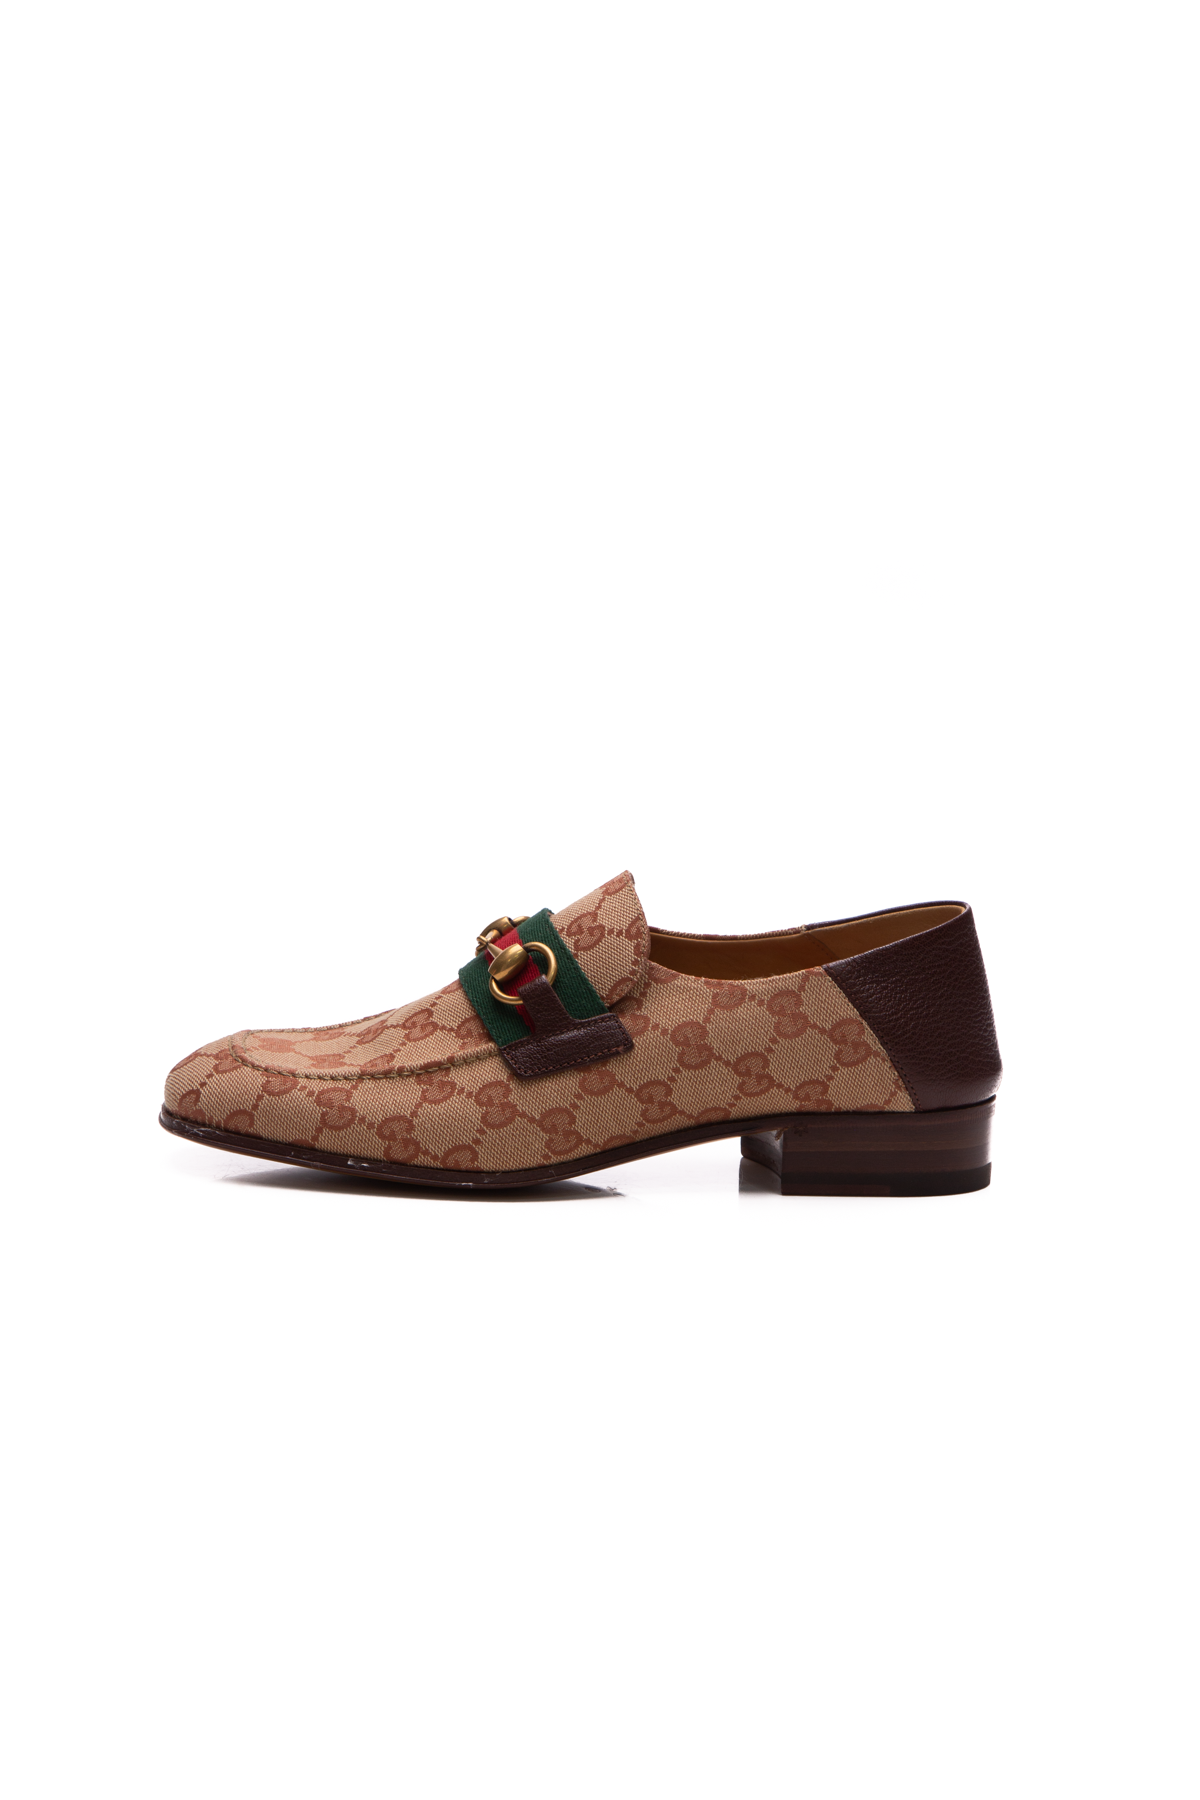 Gucci Men's Horsebit Loafers with Web